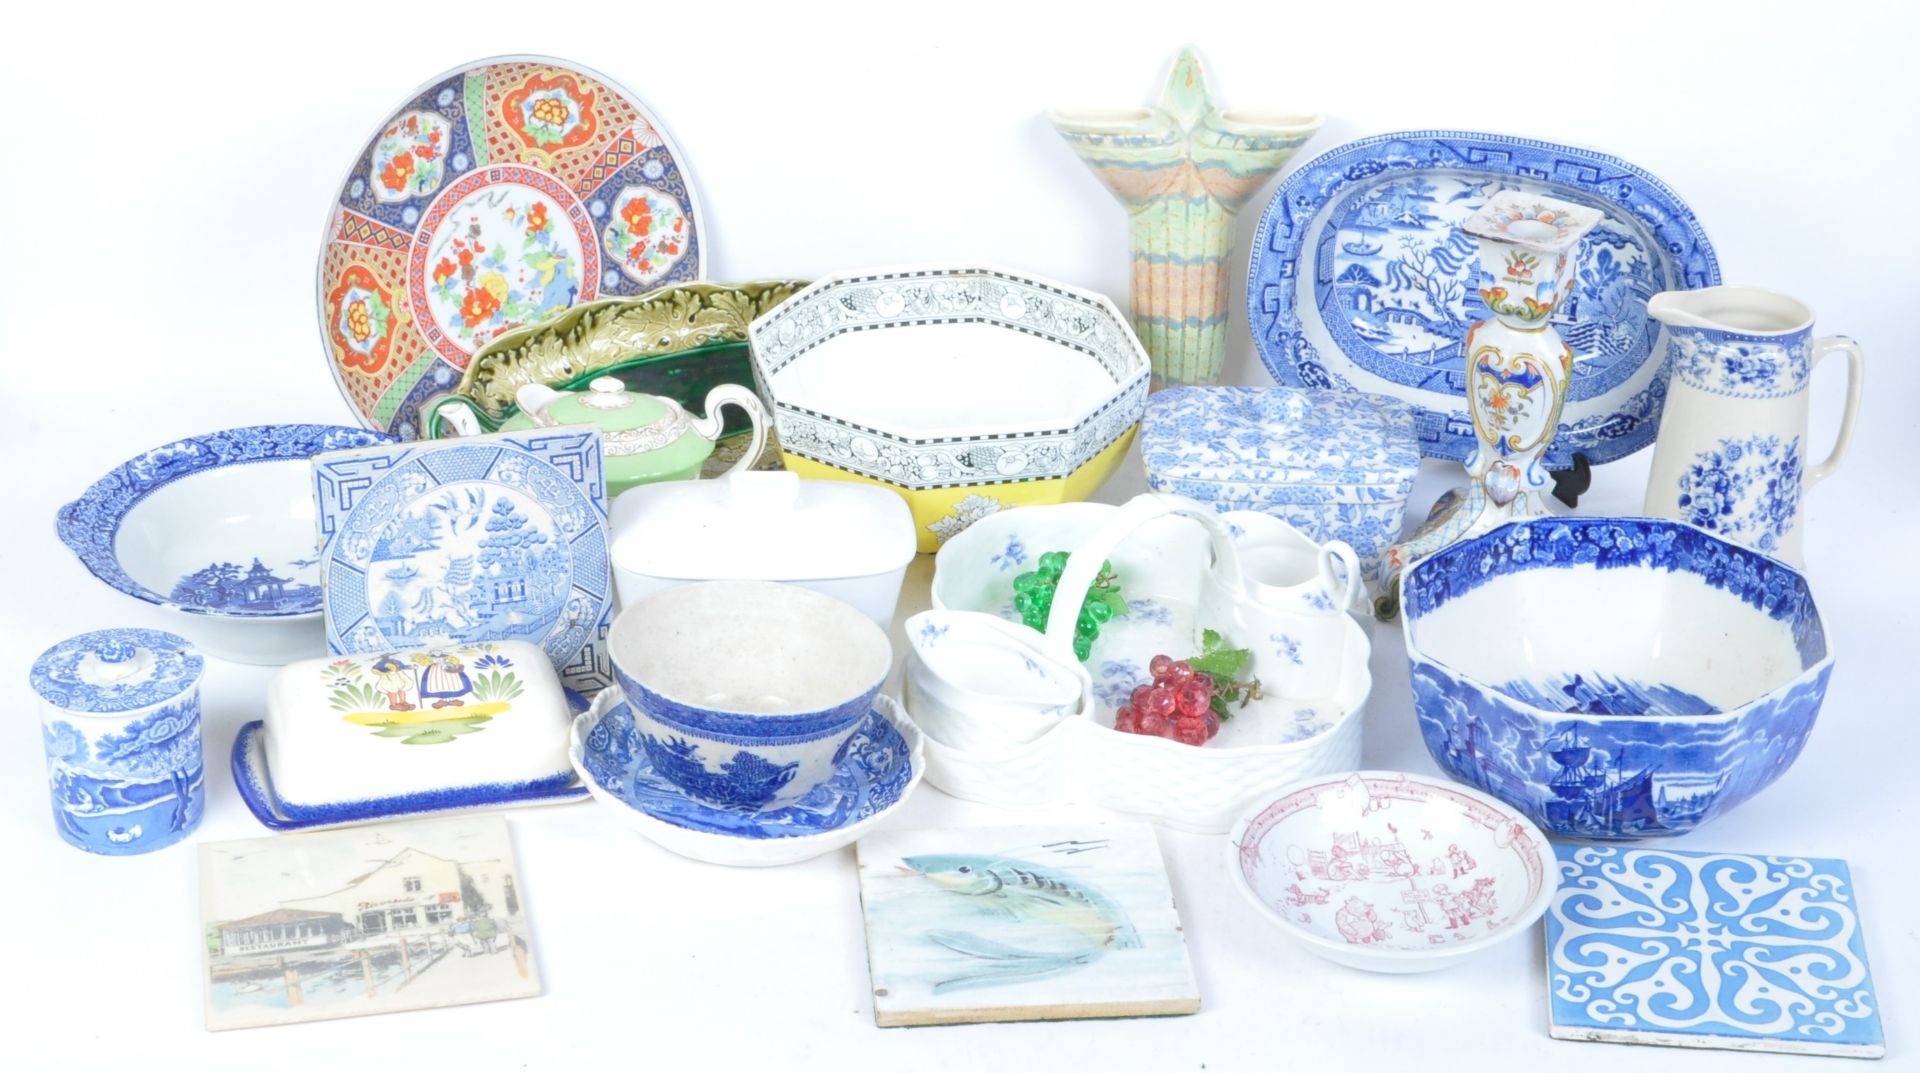 COLLECTION OF ENGLISH CERAMIC & CHINA ITEMS